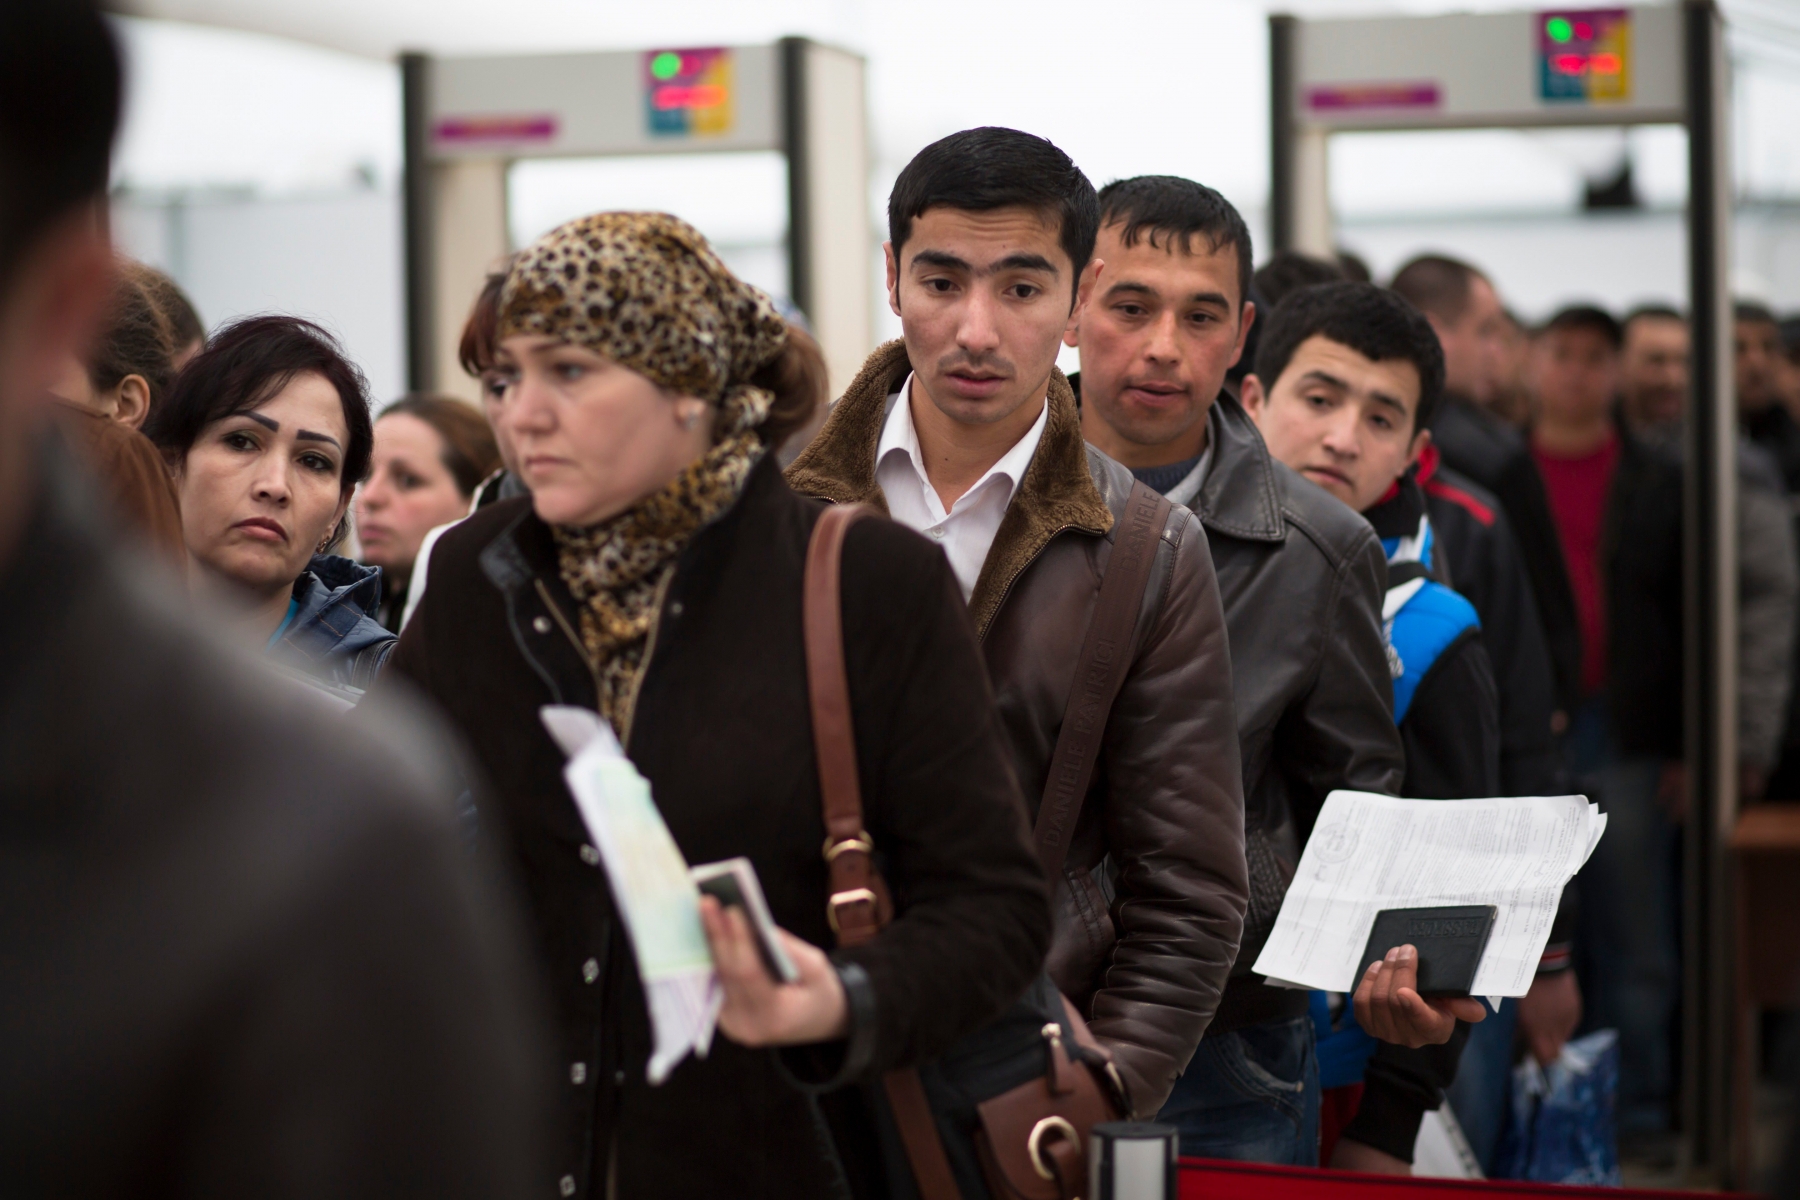 ATTN TONY HICKS.In this photo taken on Wednesday, April  22, 2015, Migrants stand in line to register at Moscow's migration center in Sakharovo, a village about 60 kilometers (35 miles) south of Moscow, Russia. Moscow's migration center works 24 hours a day, seven days a week to process work-permit applications from the flood of people from other former Soviet states who travel to the Russian capital in search of work. (AP Photo/Alexander Zemlianichenko) RUSSLAND MIGRATION